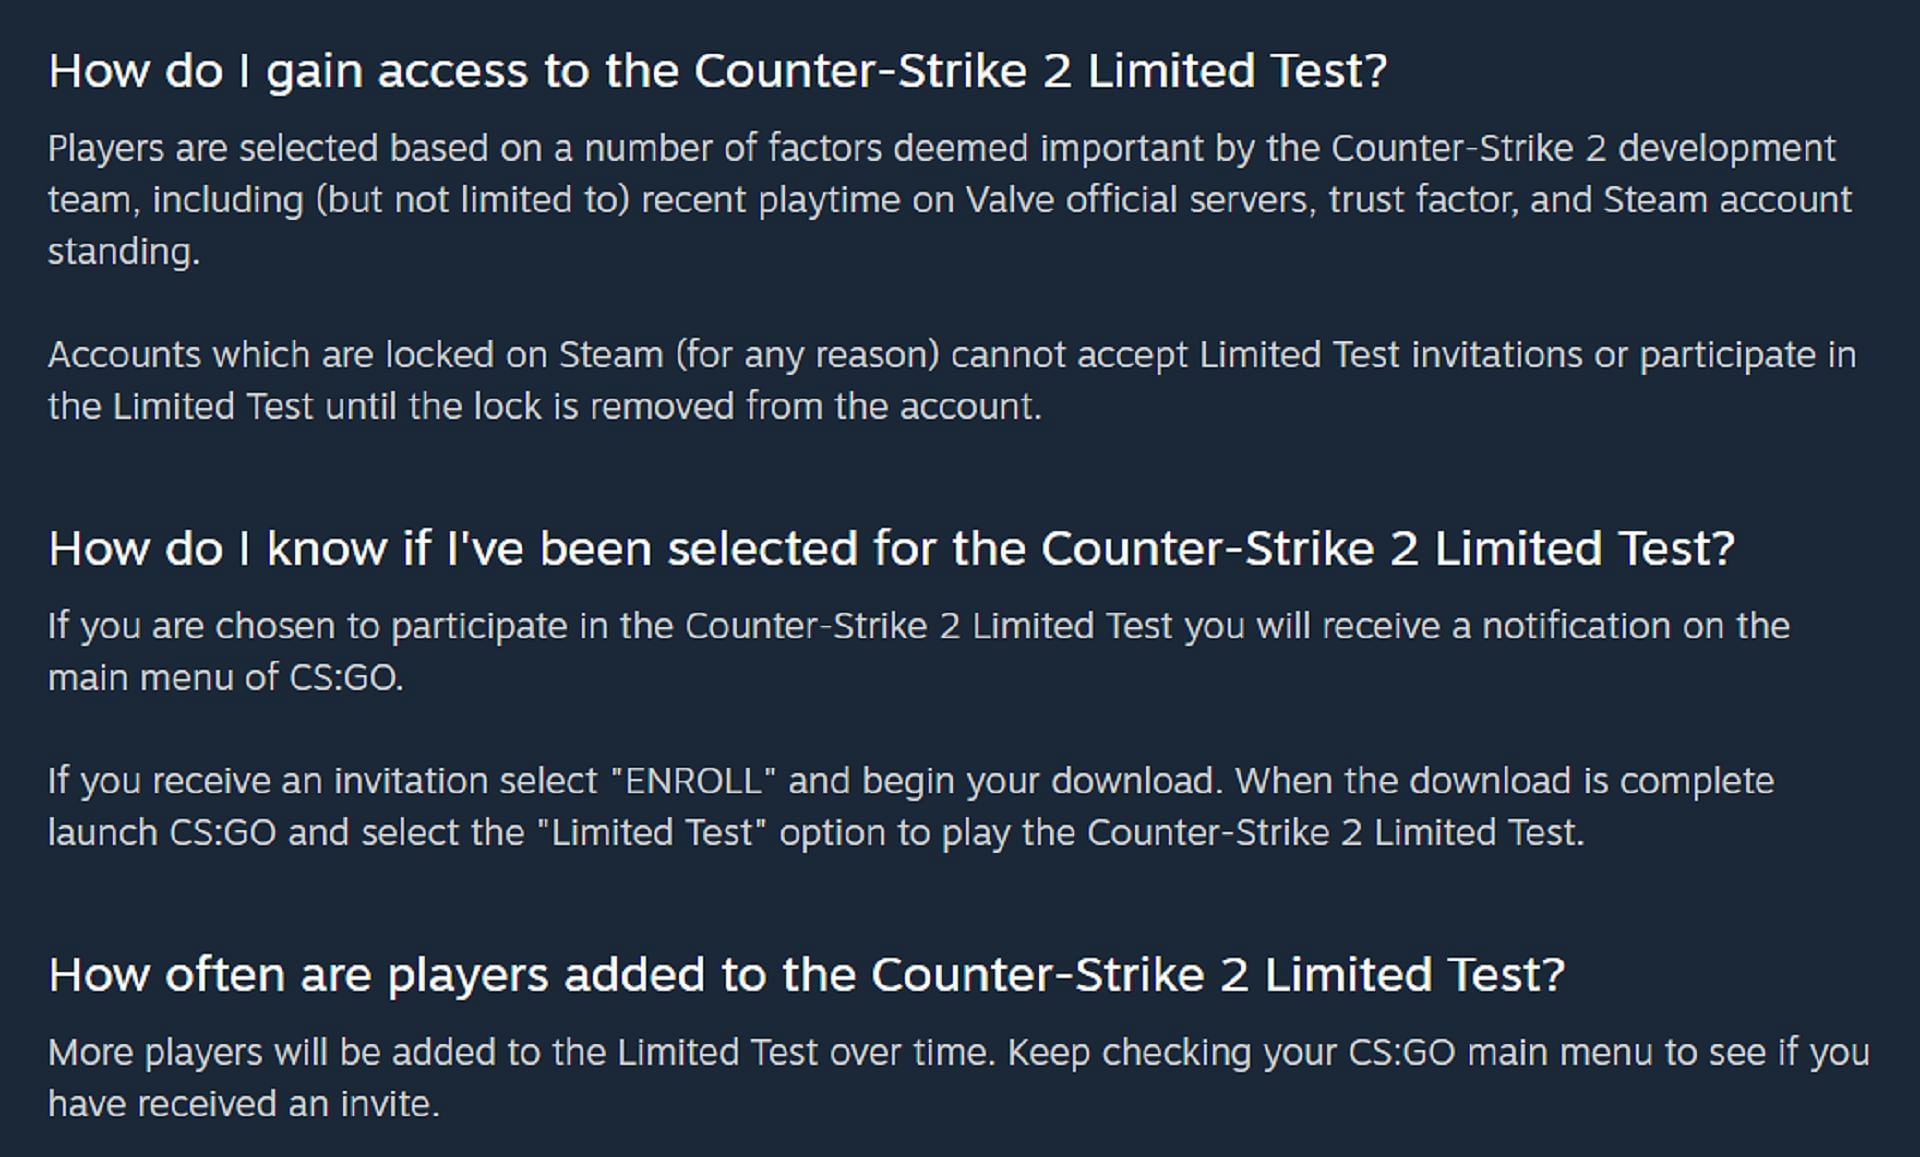 Players are selected based on several criteria (Image via Valve)